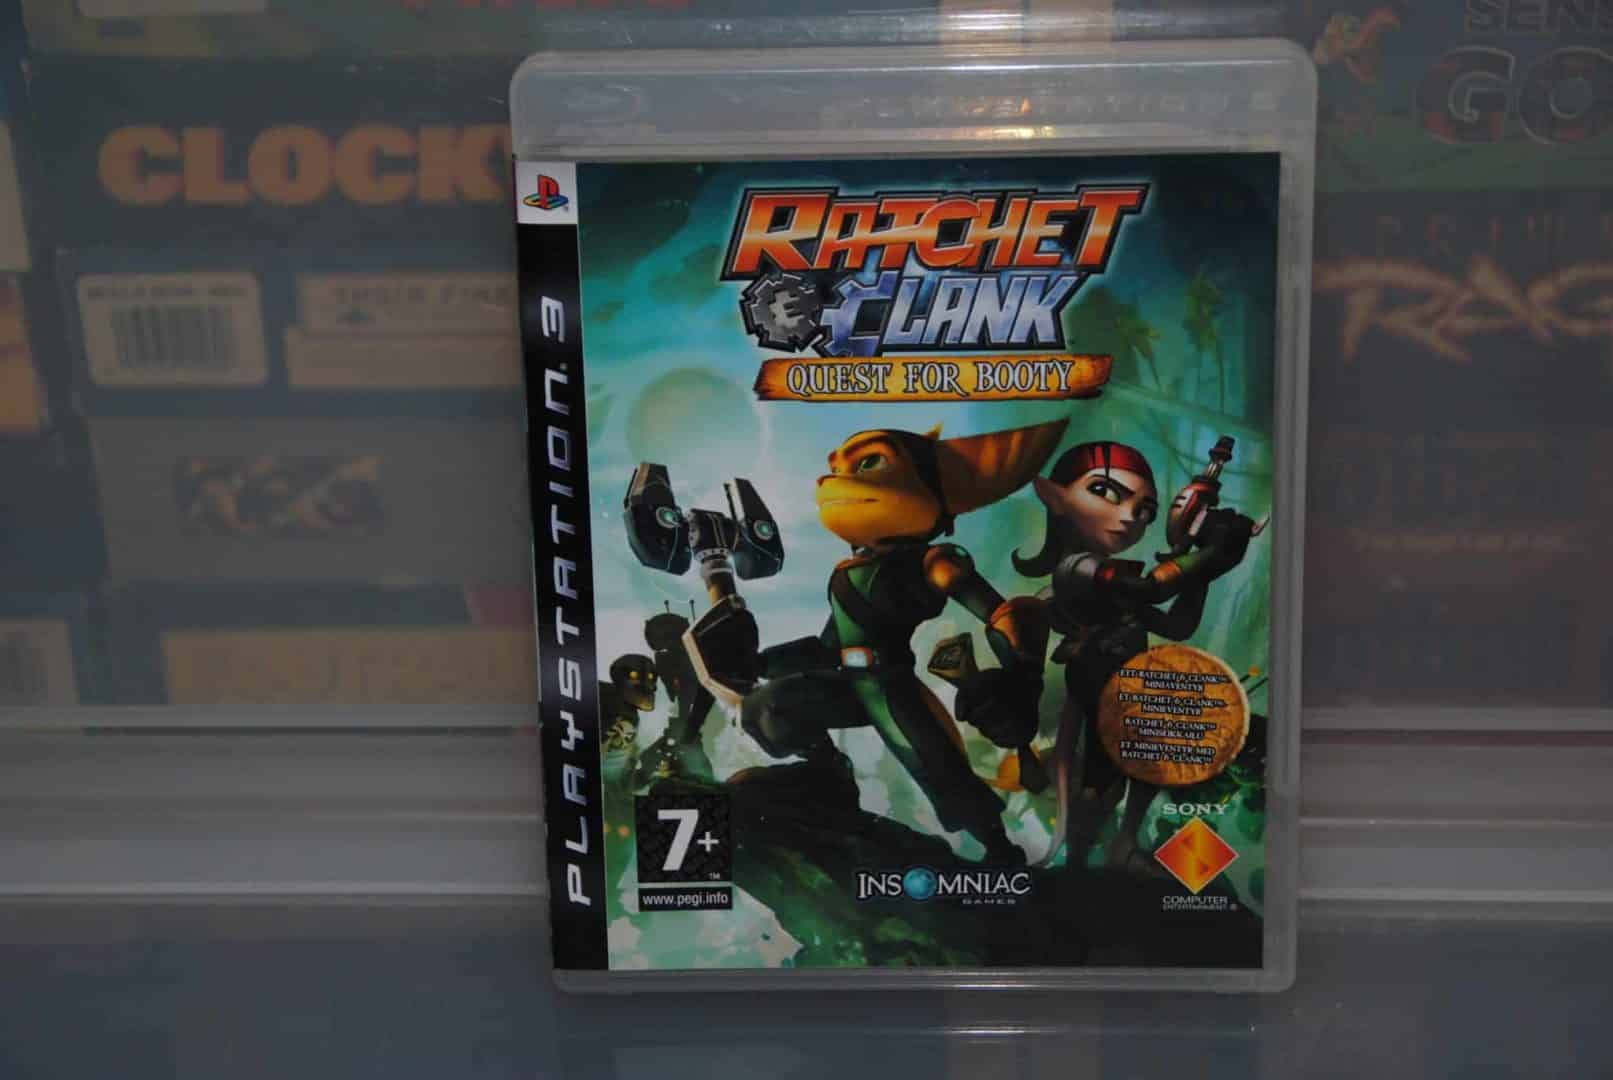 Ratchet & Clank: Quest For Booty, the first "cut down" game in the series. 